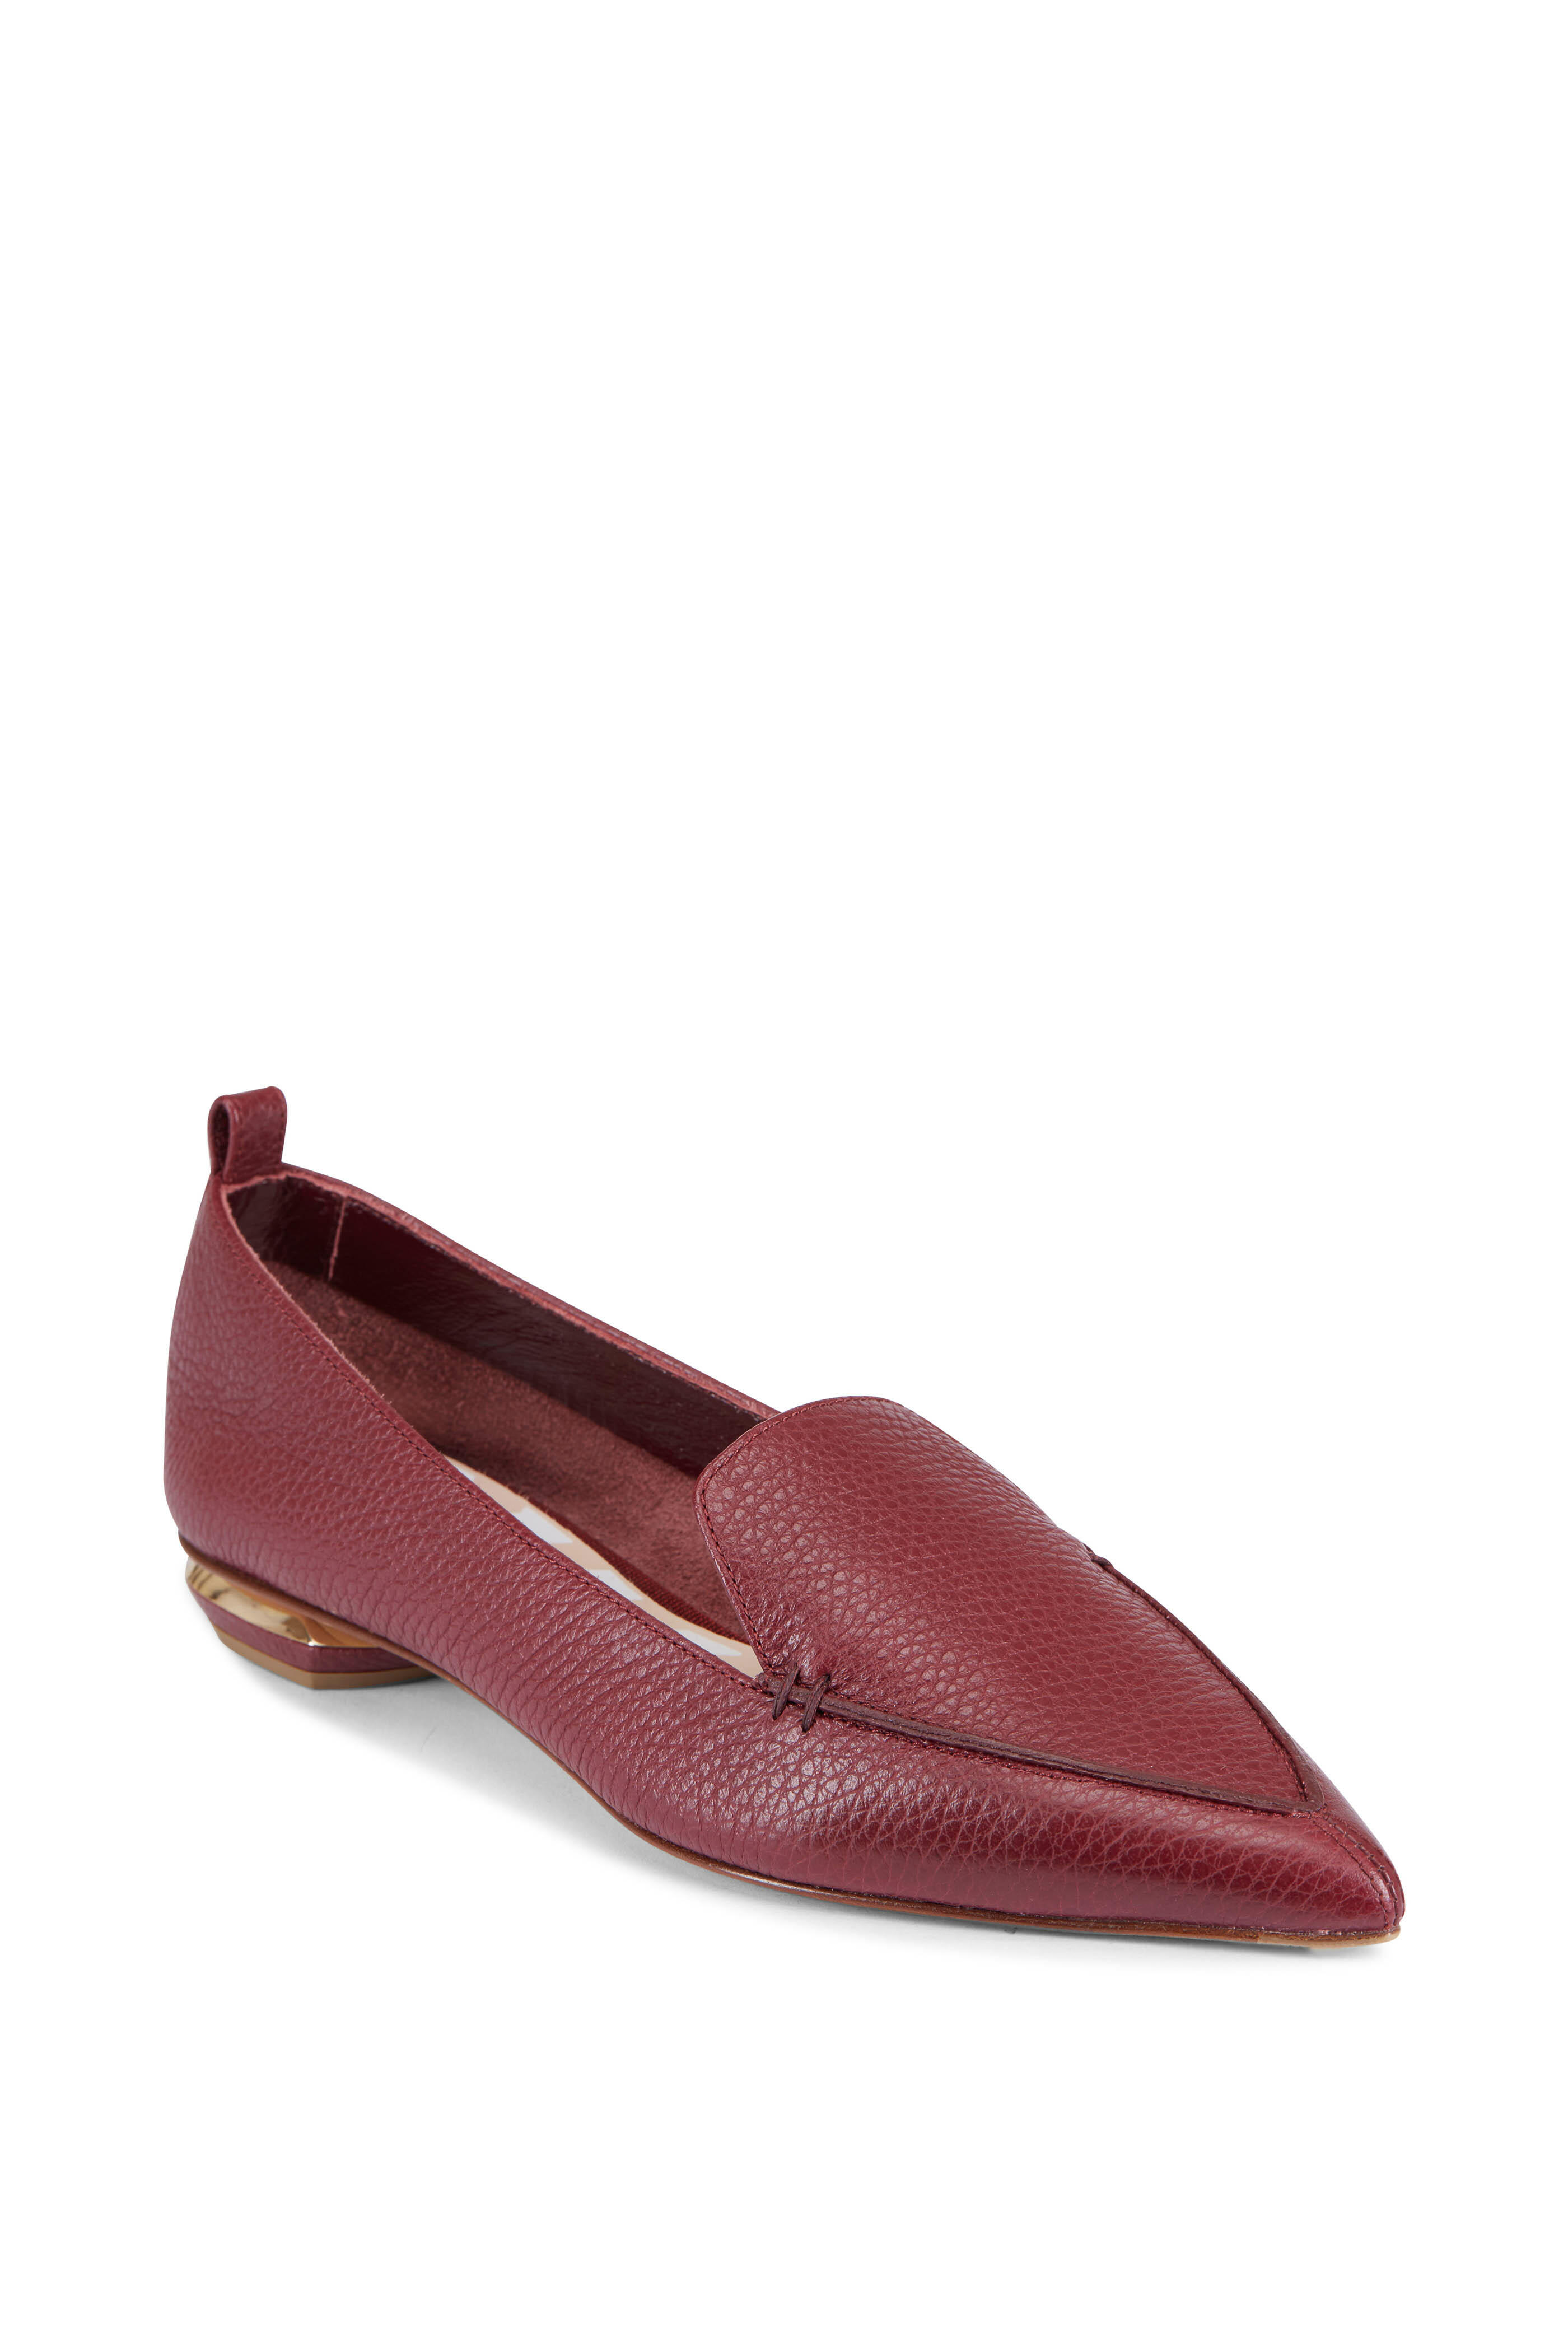 Made in Italy NICHOLAS KIRKWOOD Beya Leather Pointed loafers